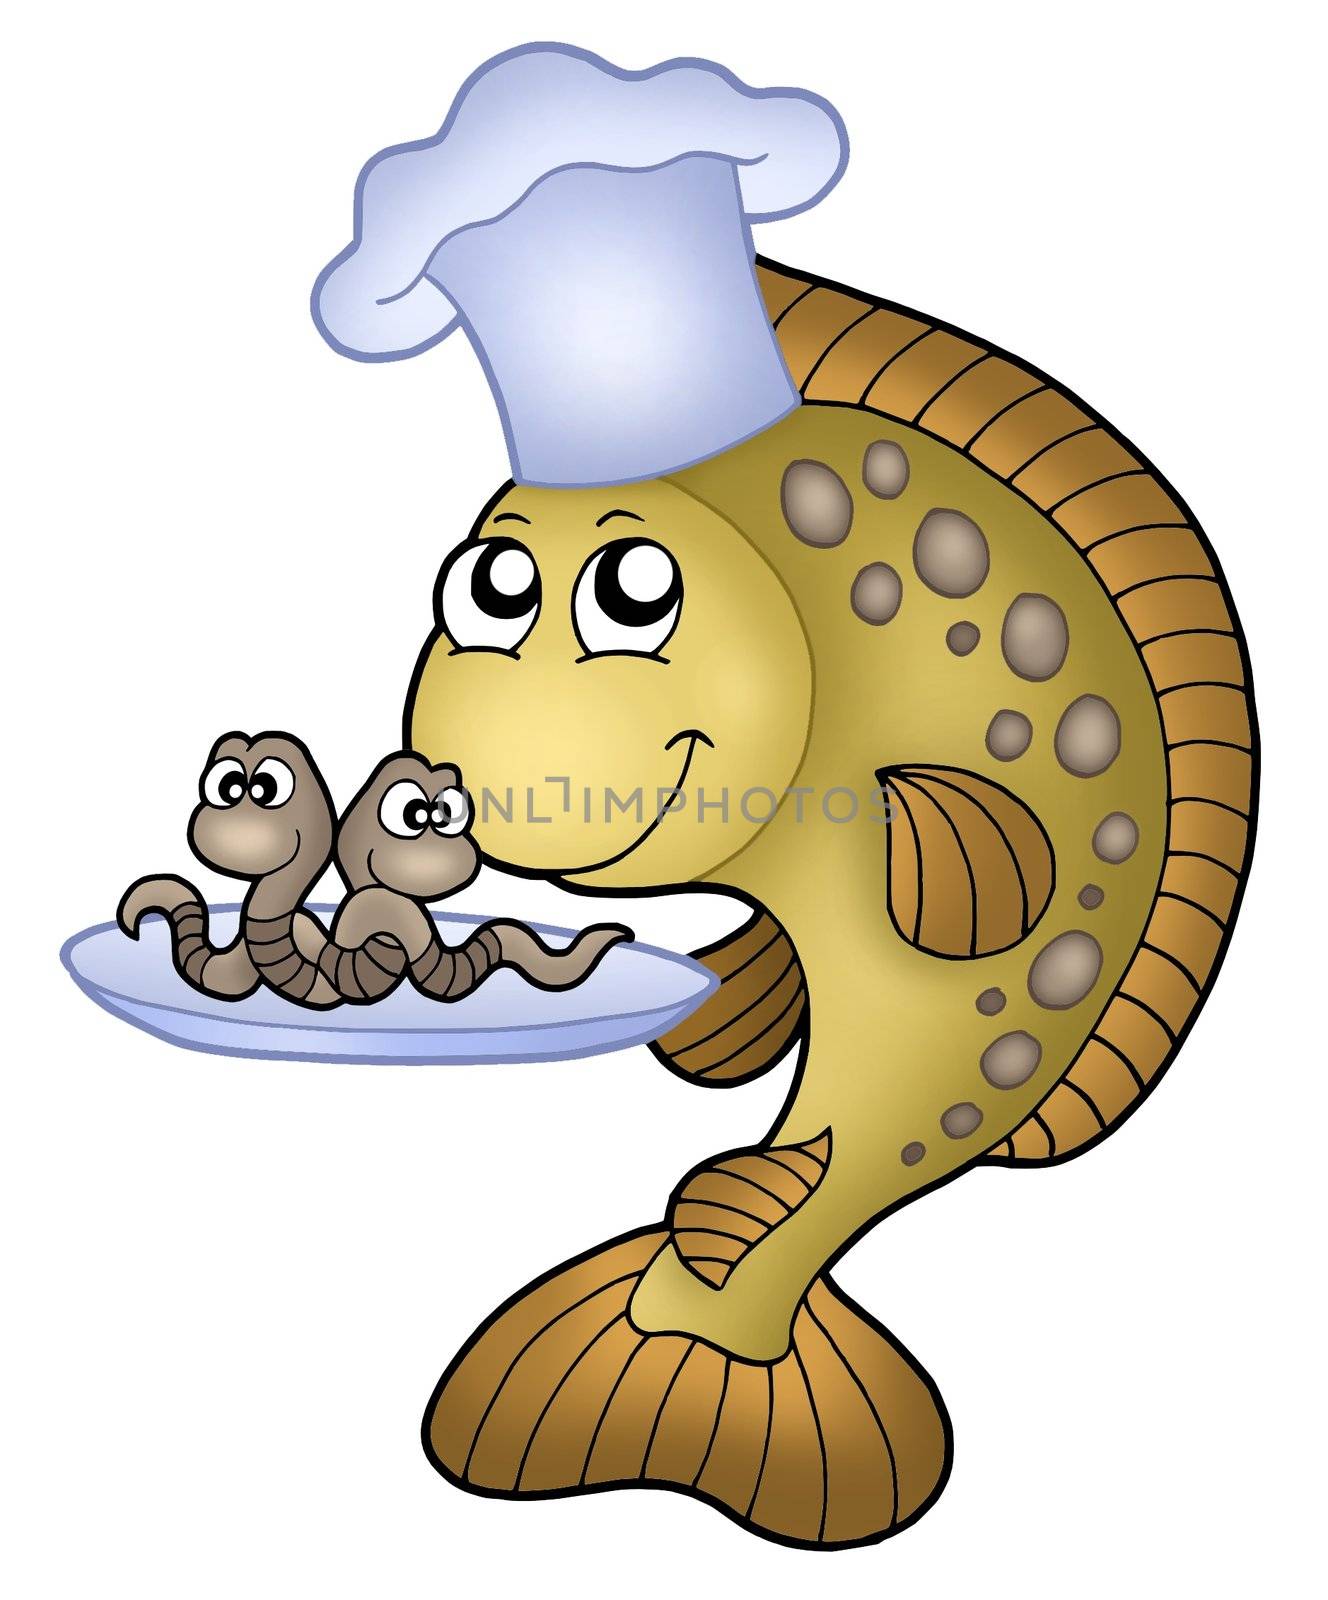 Carp chef with earthworms - color illustration.